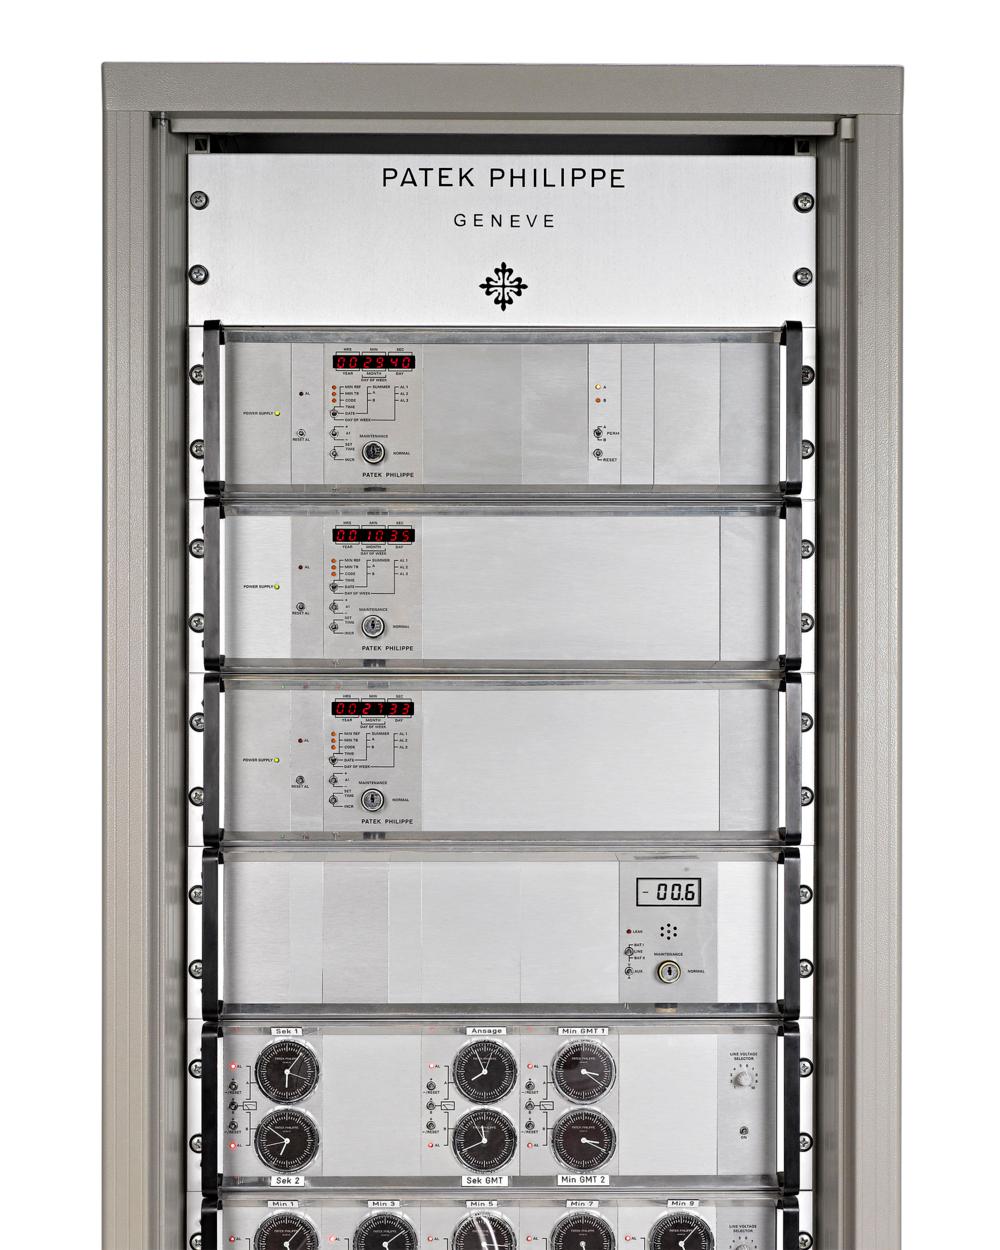 This rare nine-module time tower by Patek Philippe of Geneva represents the most state of the art master timing systems of its day. Part of the highly regarded and technologically advanced Patek Philippe Electronic Clock System, this master clock